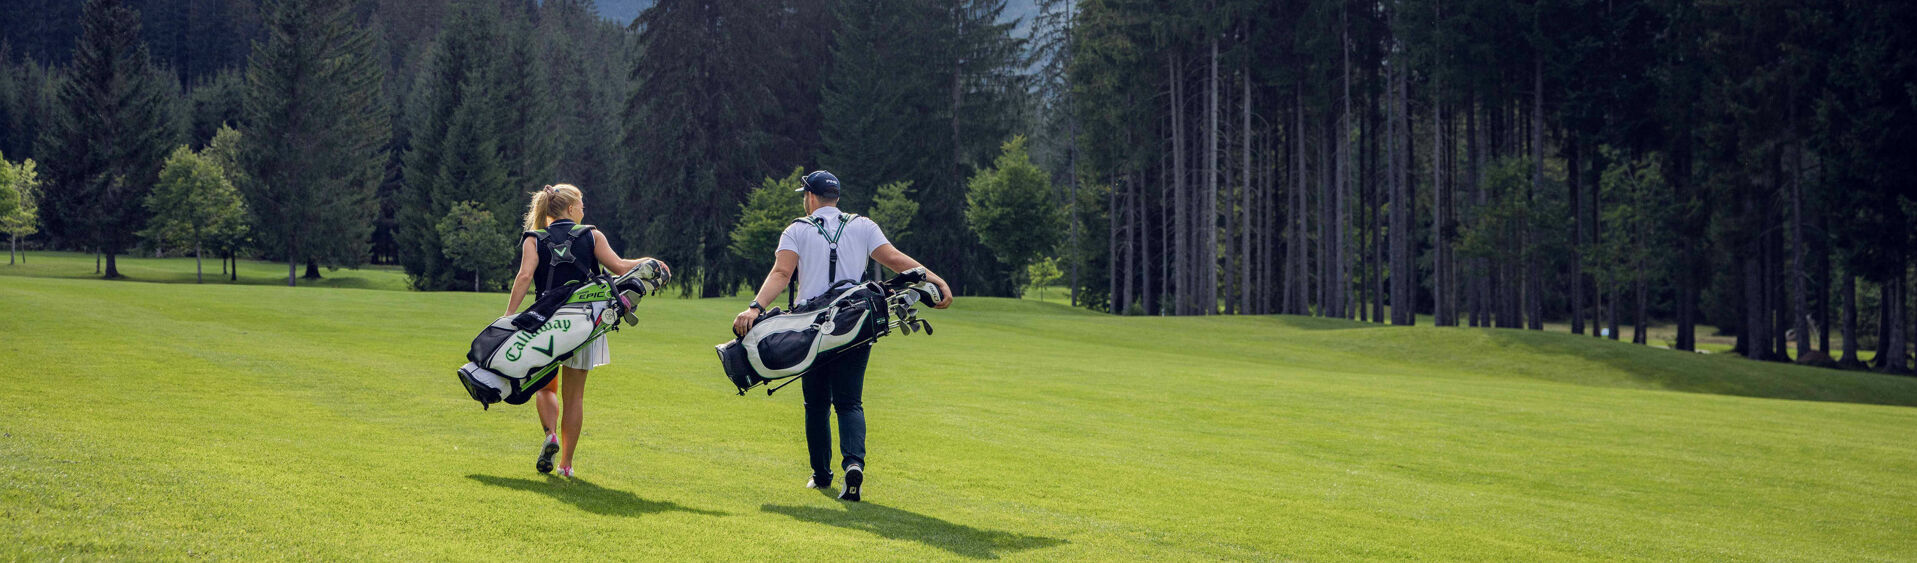 Spectacular scenery and perfect greens provide the backdrop for golfing on the Golf- und Landclub Achensee in Pertisau.